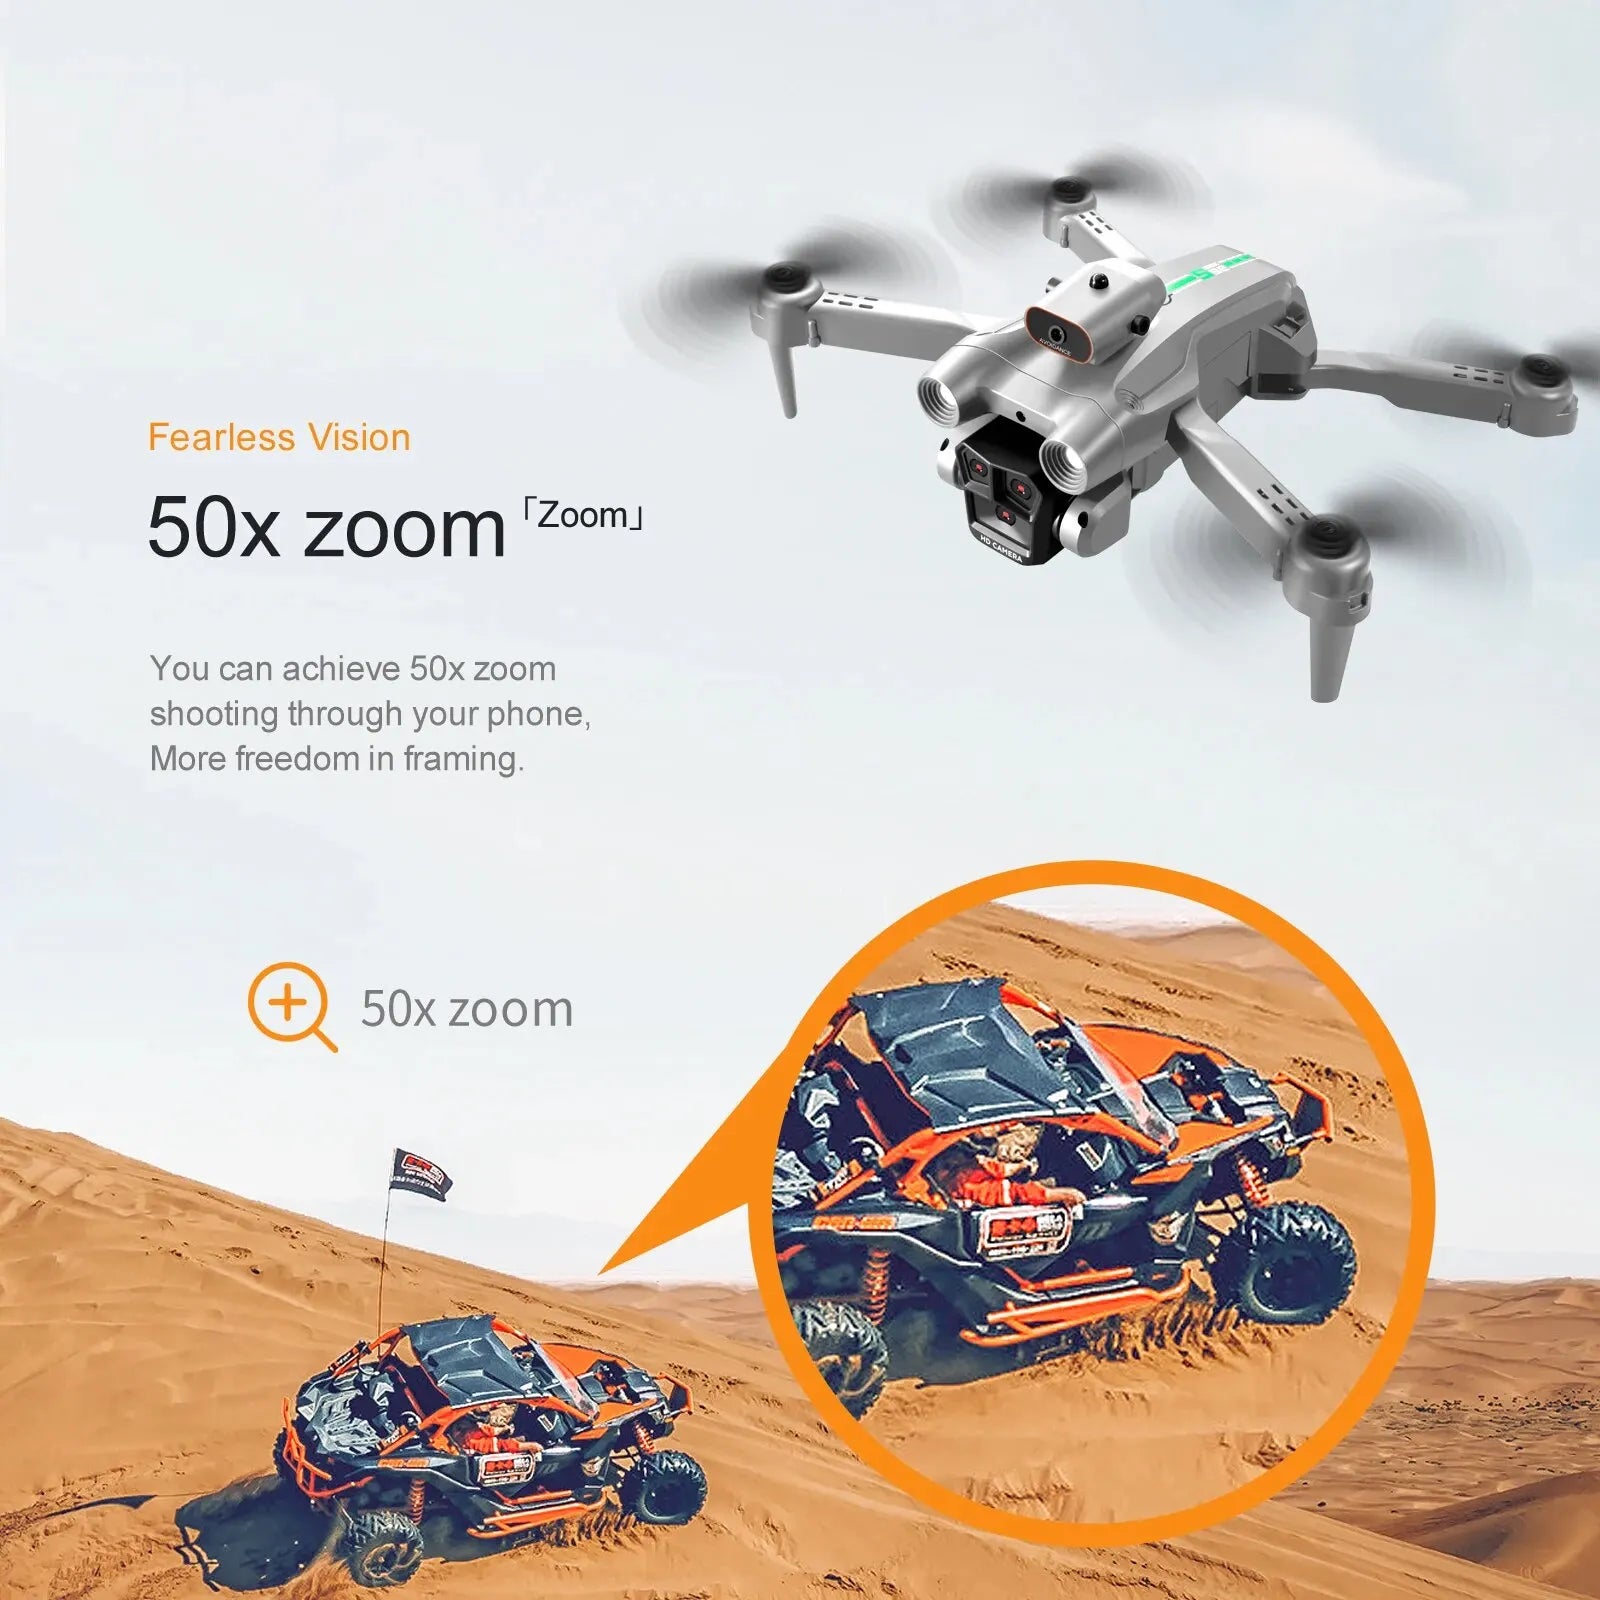 S92 Drone, 5ox zoom tzoomu you can achieve 50x